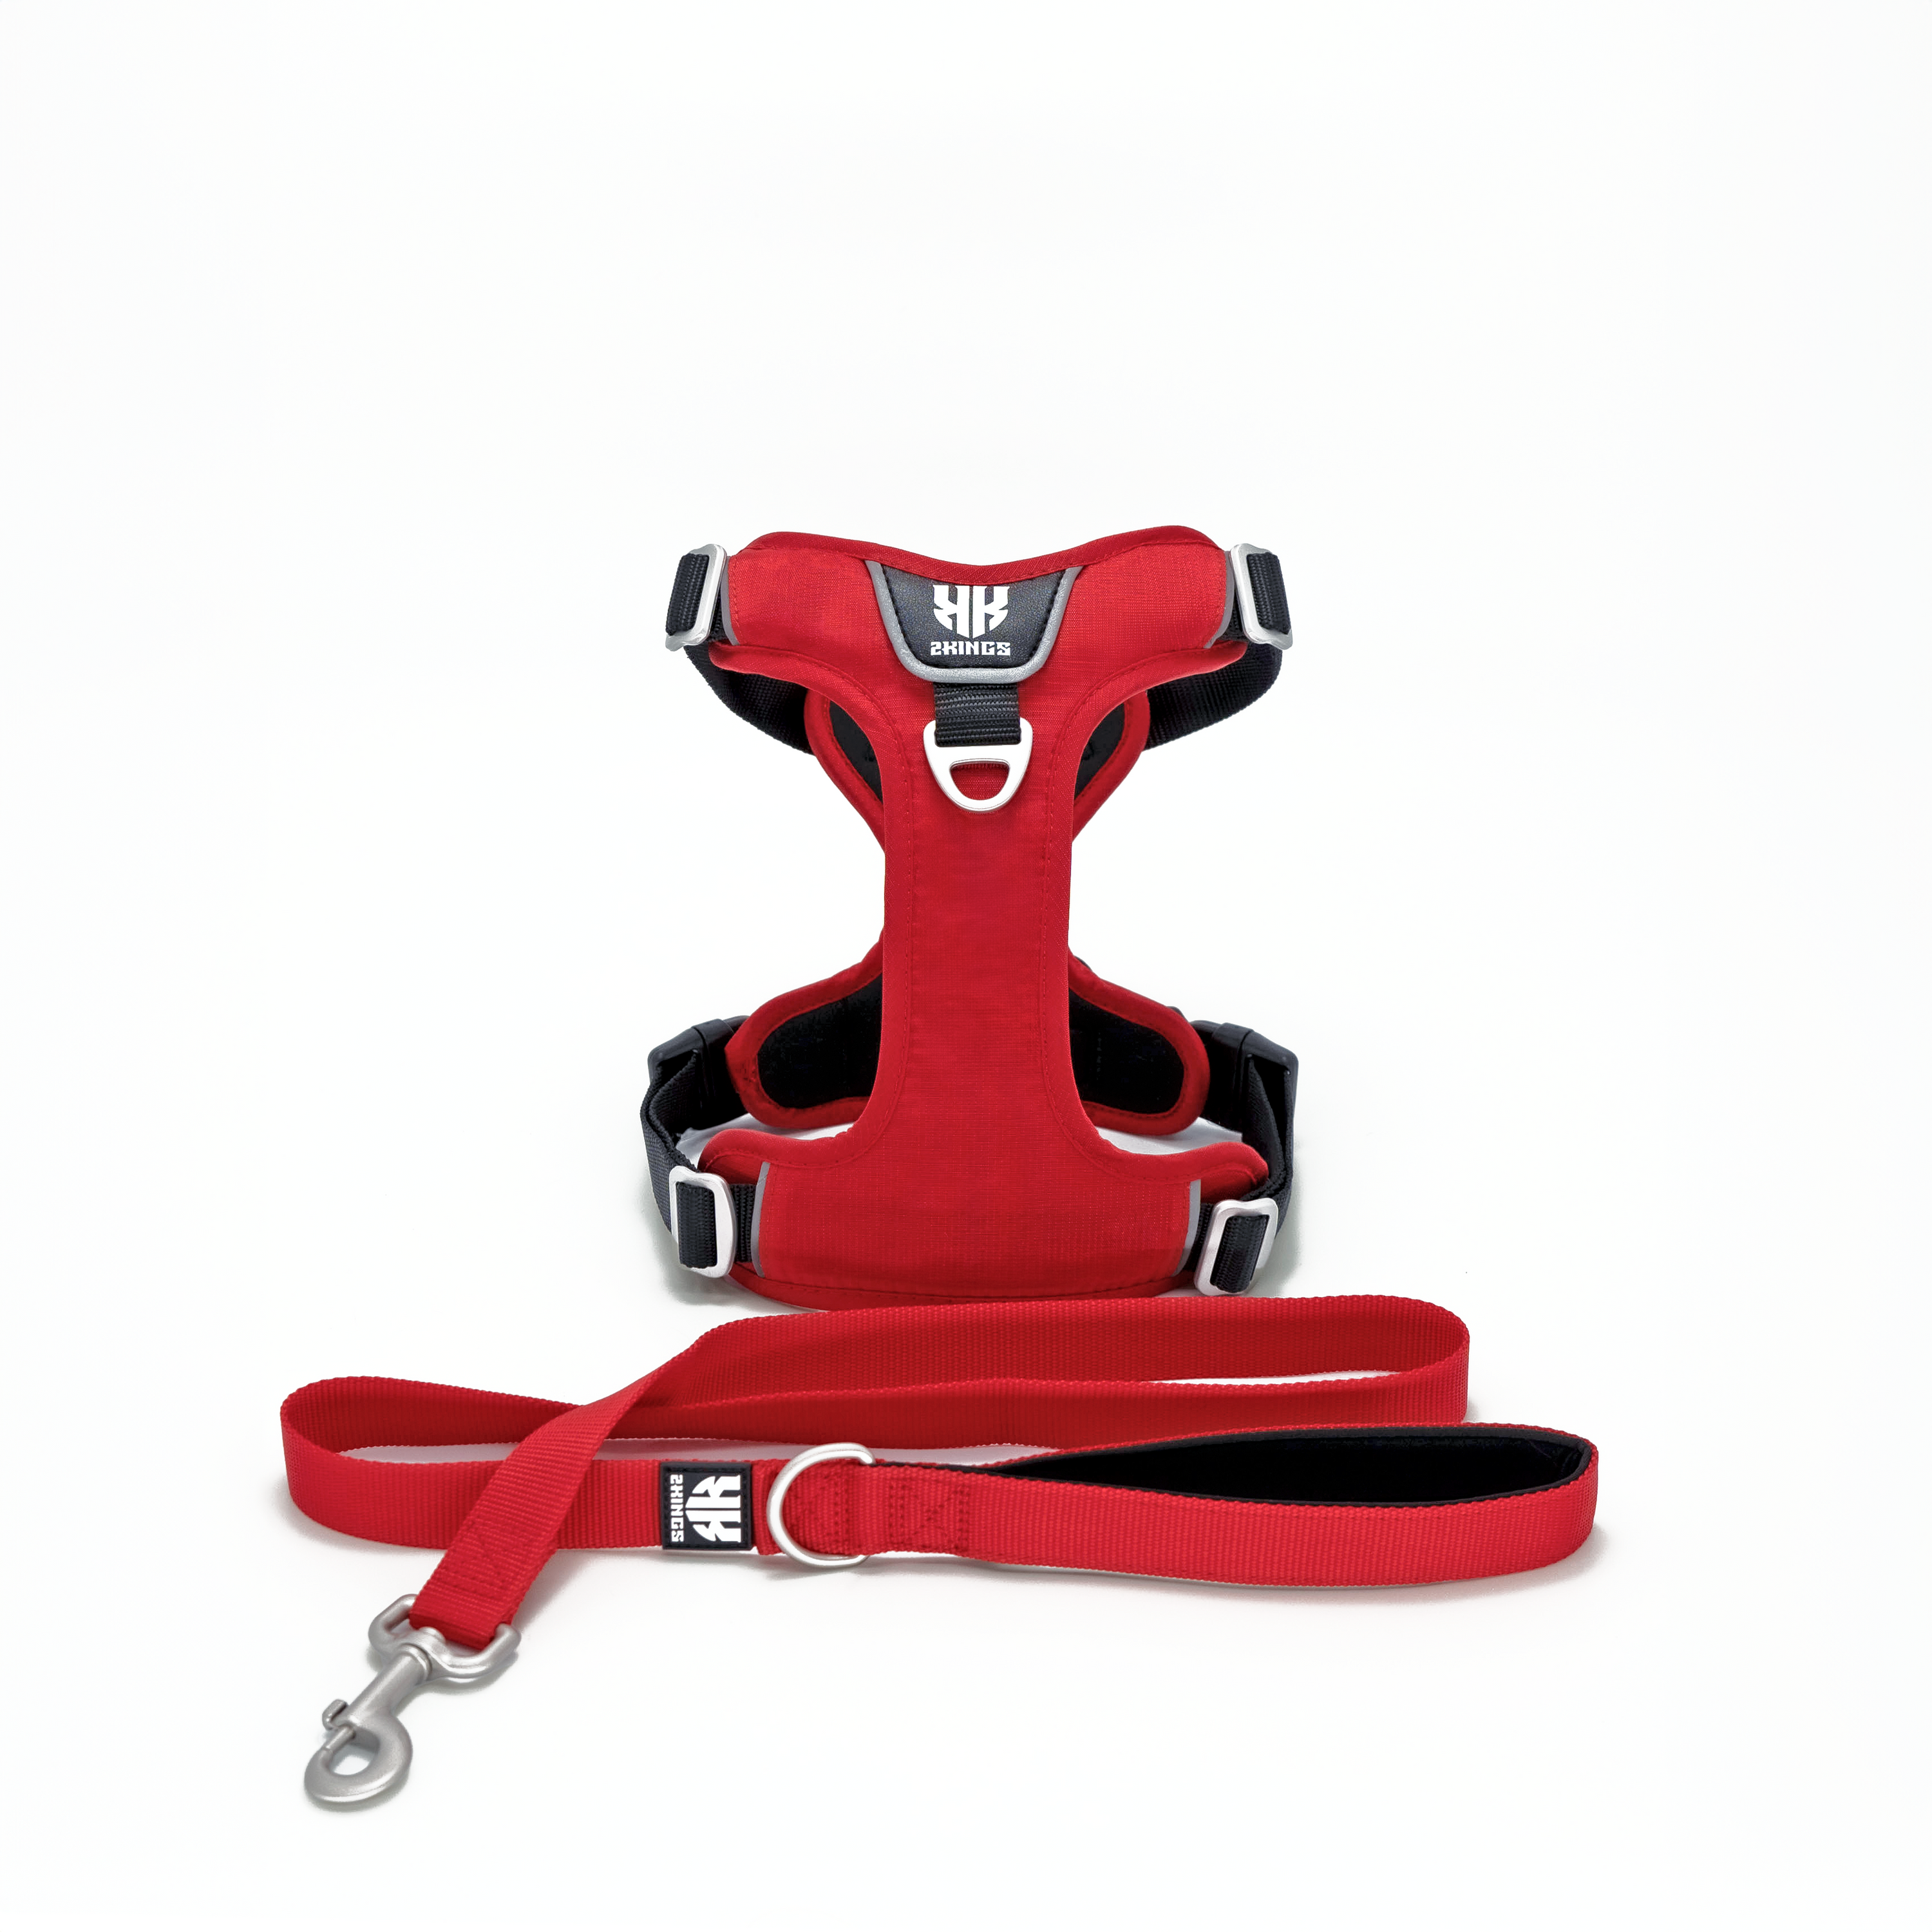 Comfort Dog Harness & Classic Lead Set - Waterproof with Top Handle -Red.